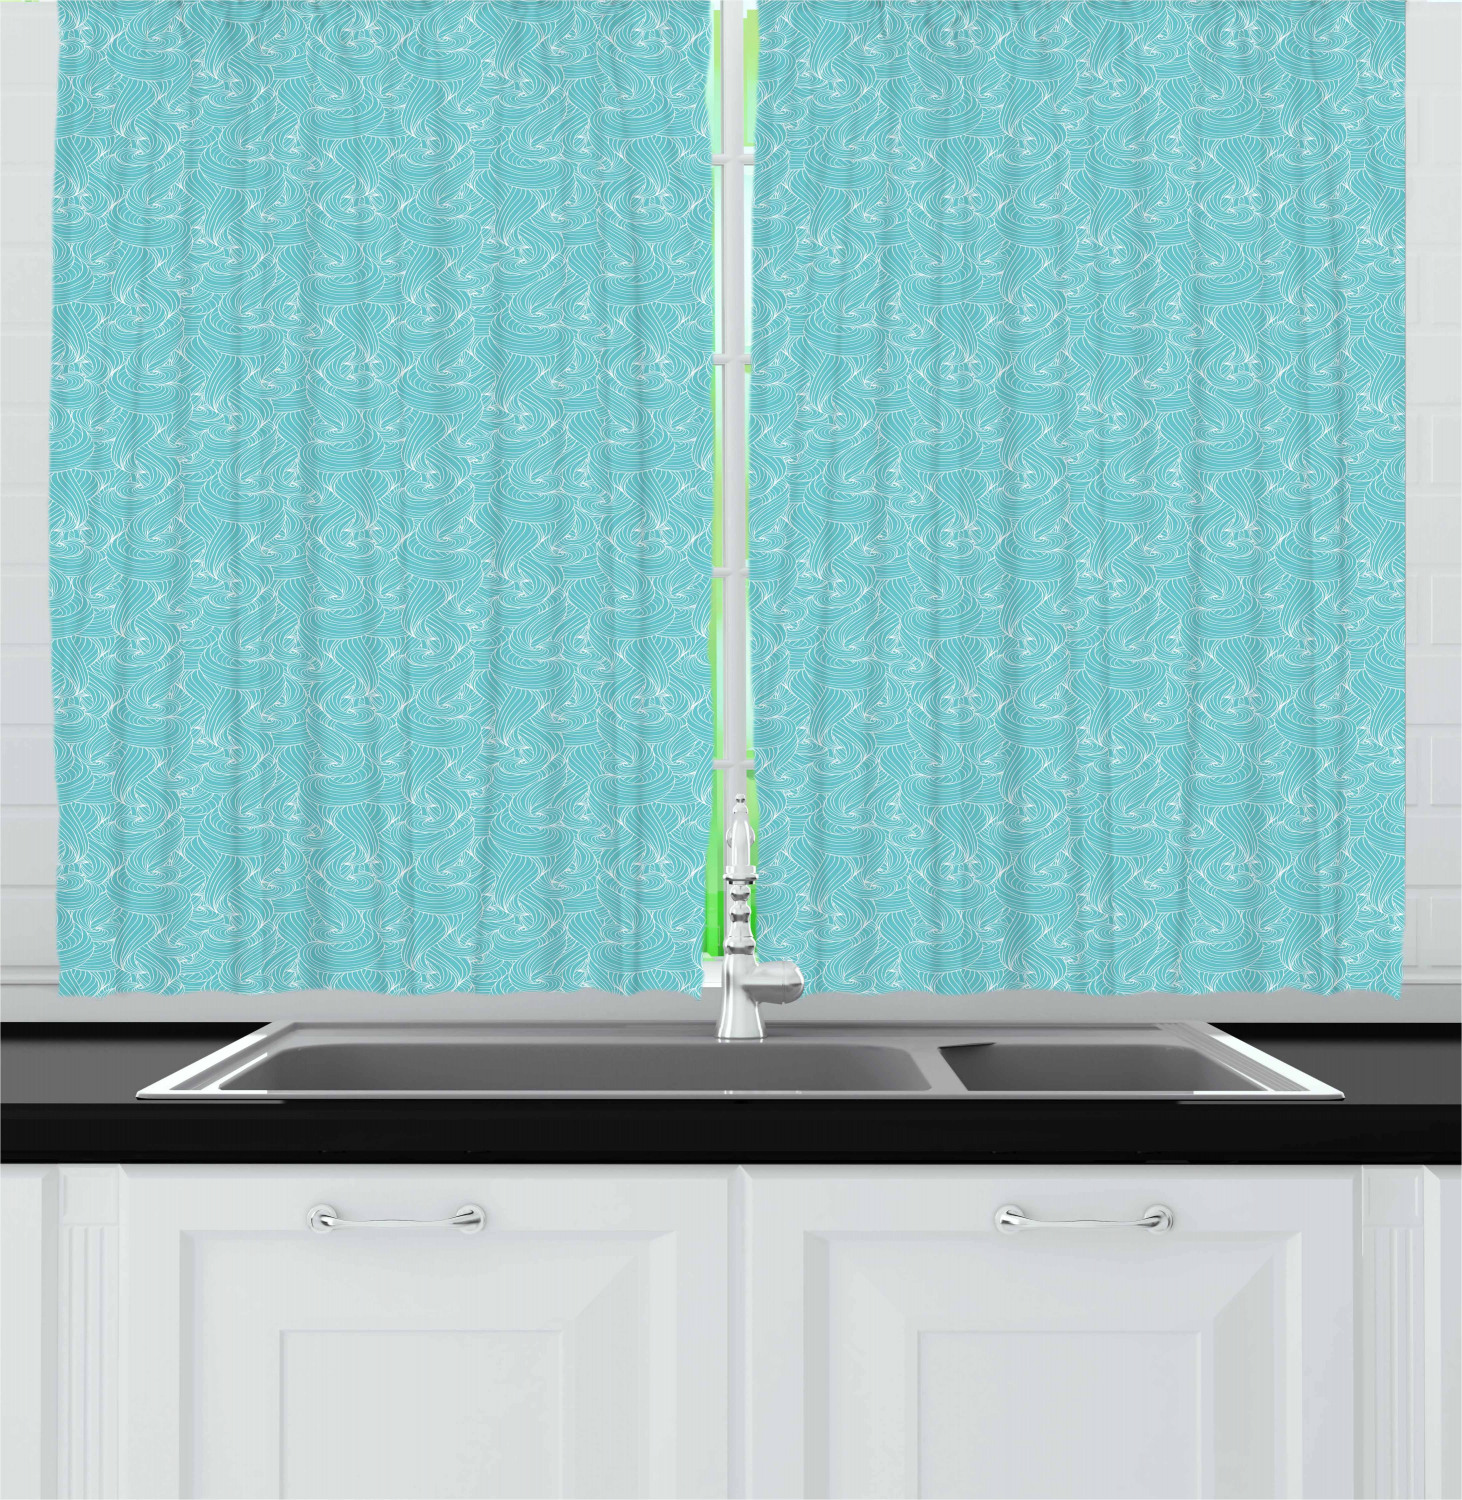 Turquoise Kitchen Curtains 2 Panel Set Window Drapes 55 X 39 By